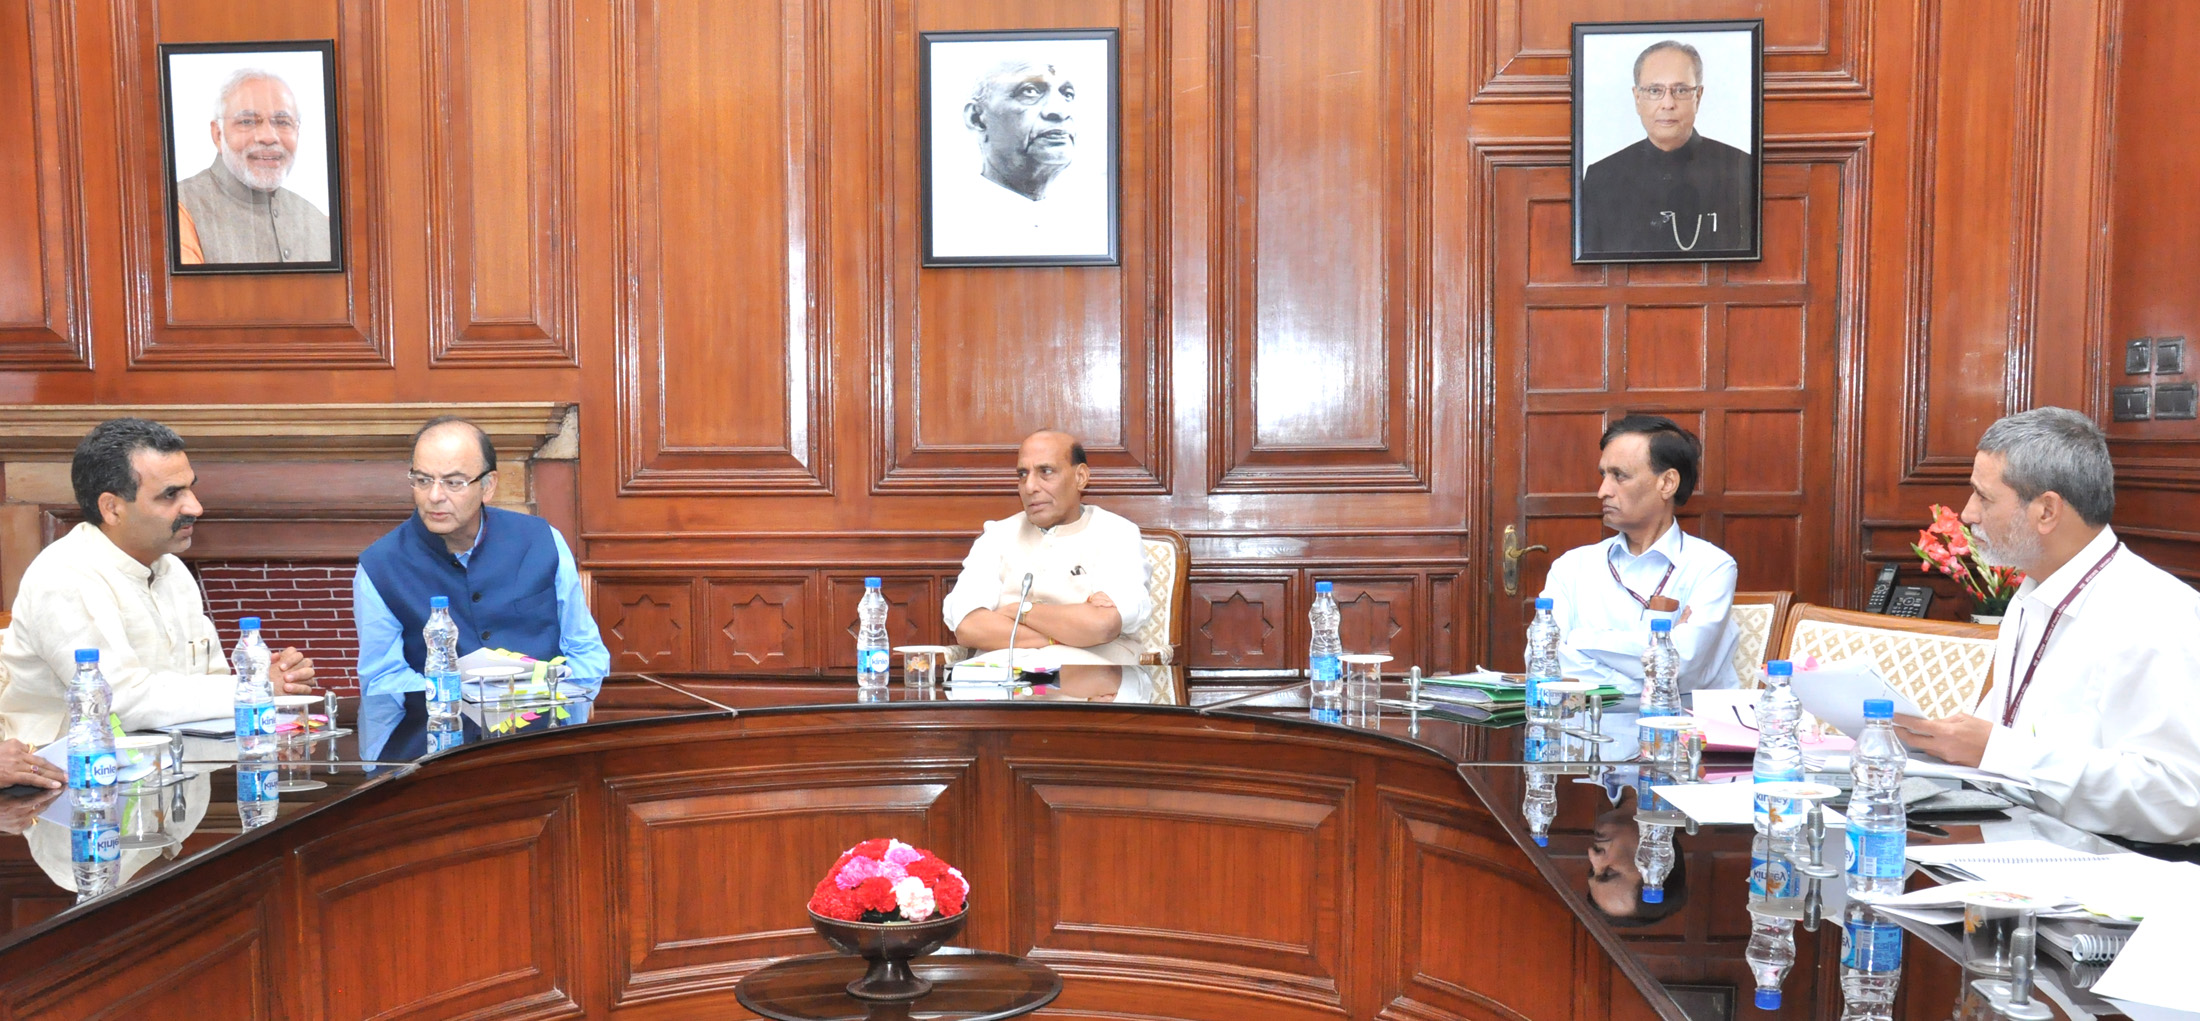 The Union Home Minister, Shri Rajnath Singh chairing a meeting of the High Level Committee for Central Assistance to States affected by the Natural Disasters, in New Delhi on July 24, 2015. 	The Union Minister for Finance, Corporate Affairs and Information & Broadcasting, Shri Arun Jaitley, the Minister of State for Agriculture, Dr. Sanjeev Kumar Balyan, the Union Home Secretary, Shri L.C. Goyal and the Agriculture Secretary, Shri Siraj Hussain are also seen.